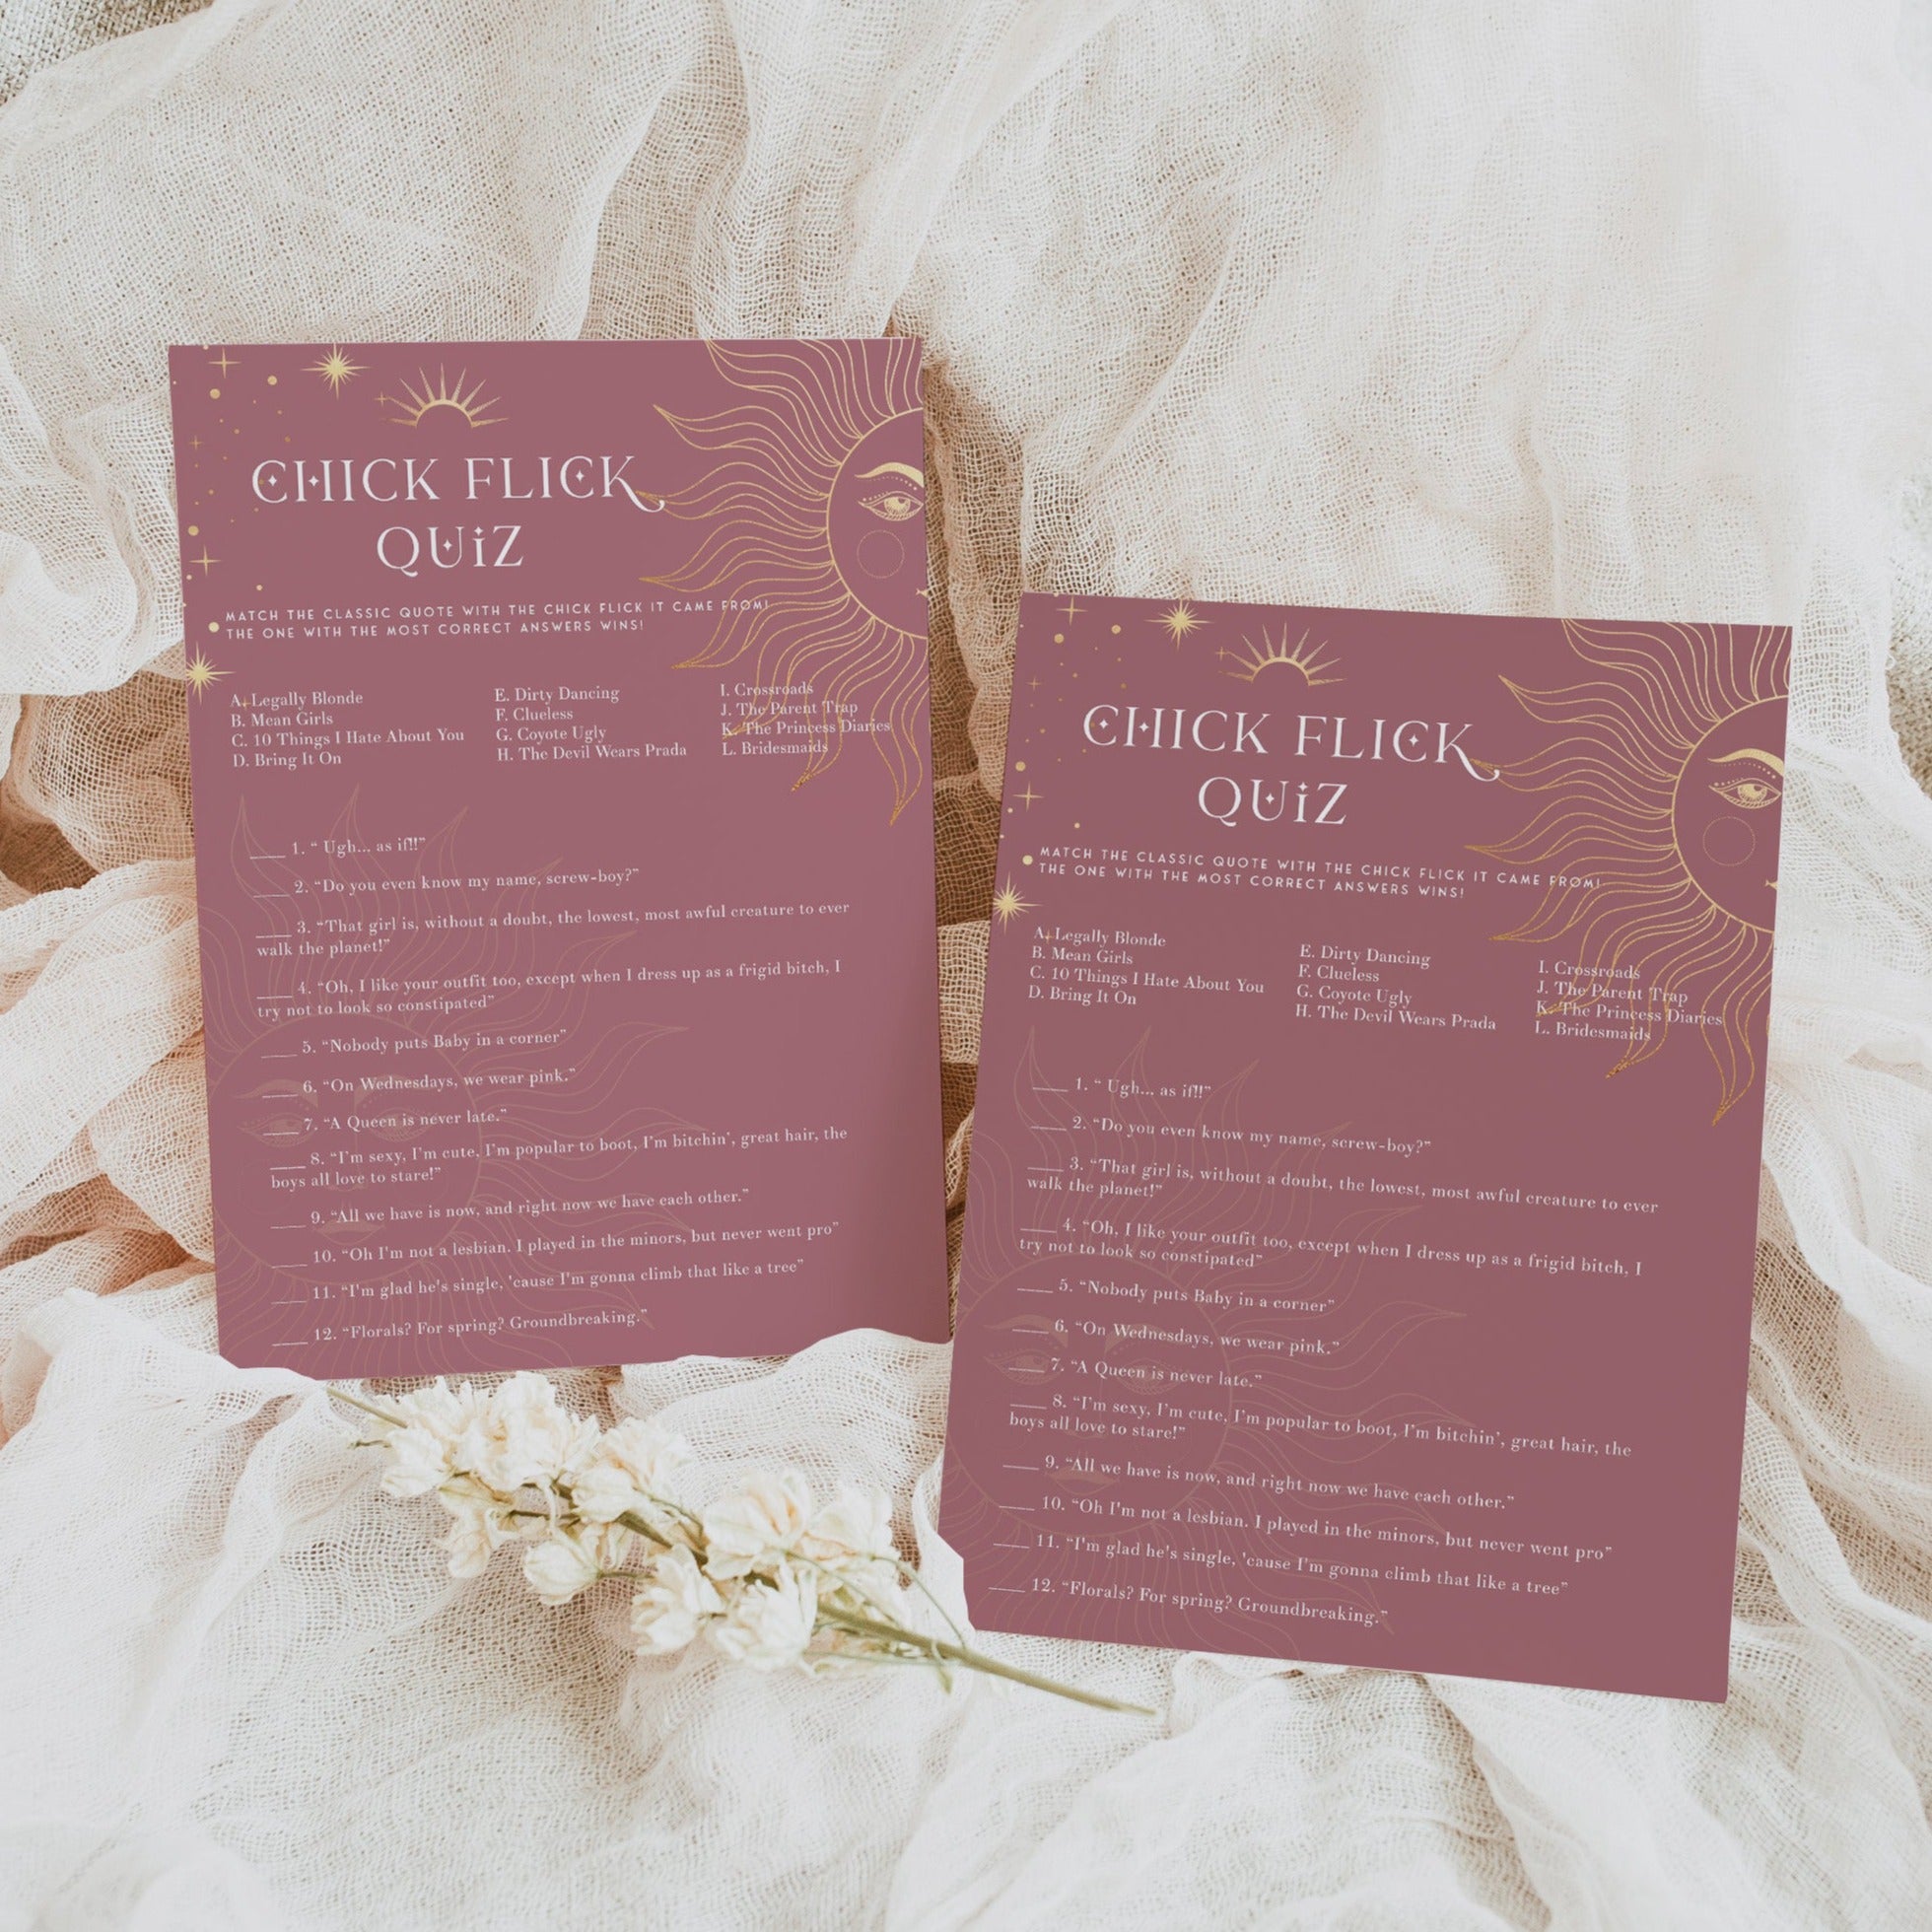 Fully editable and printable bridal shower chick flick quiz game with a celestial design. Perfect for a celestial bridal shower themed party